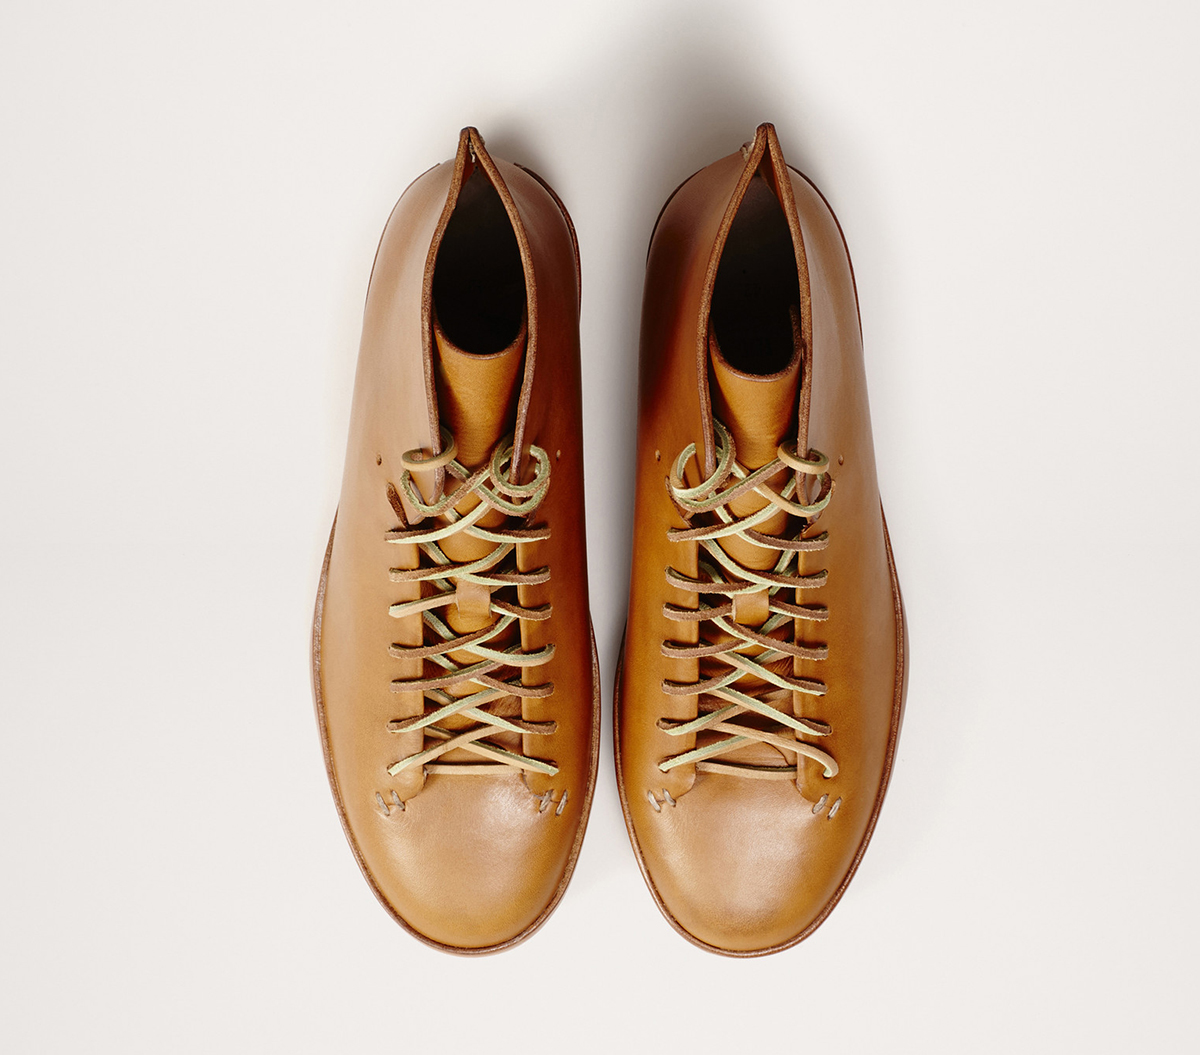  Feit Direct shoes Hand Sewn High 